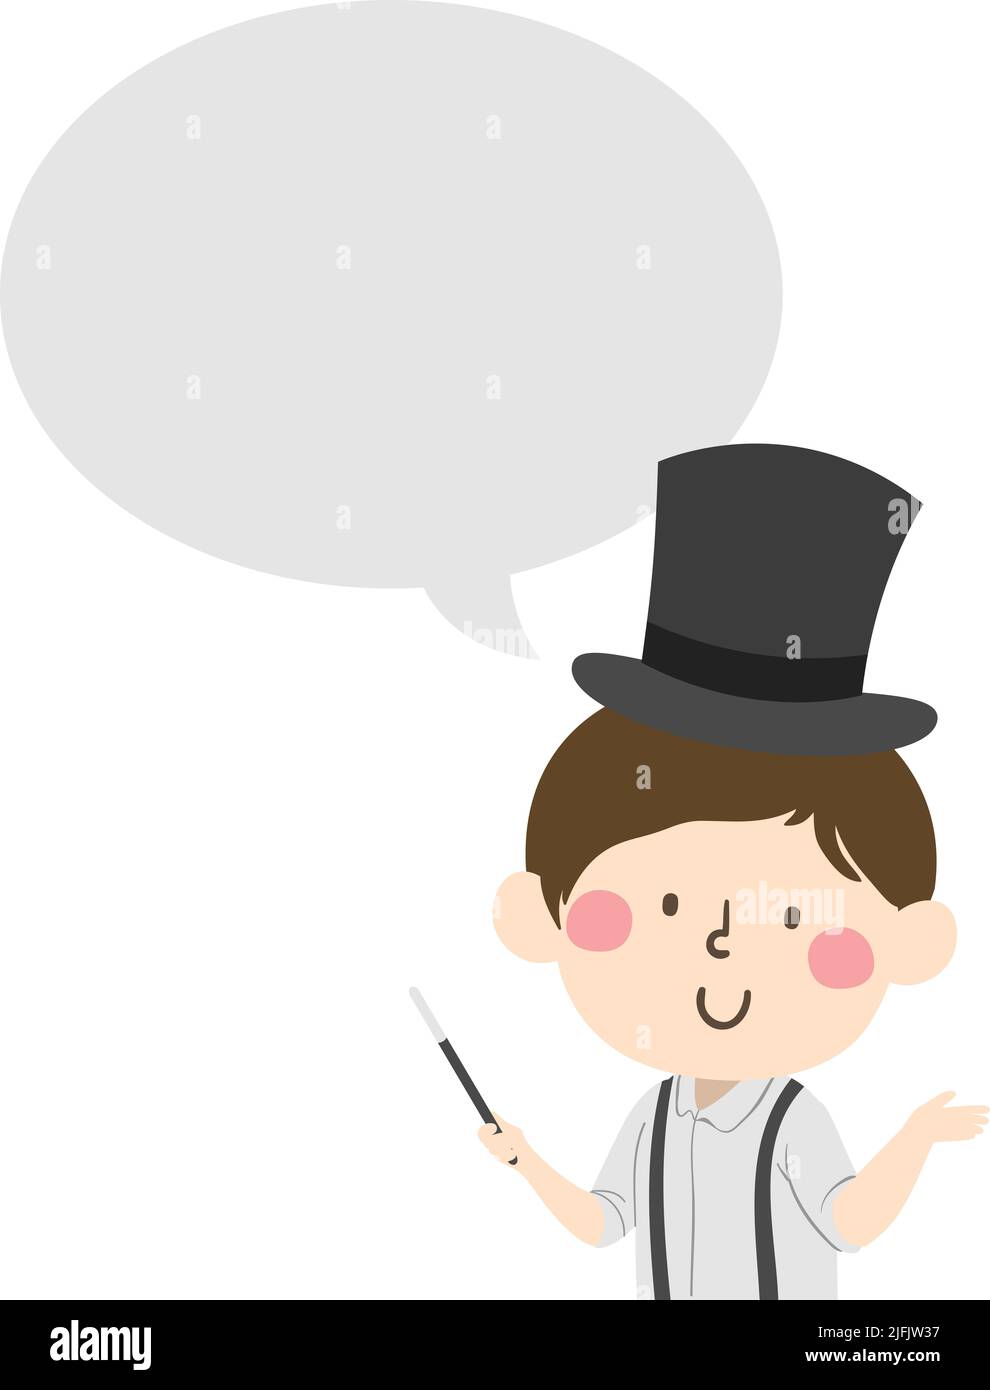 Illustration of Kid Boy Magician Wearing Top Hat and Suspenders, Holding Magic Wand with Speech Bubble Stock Photo